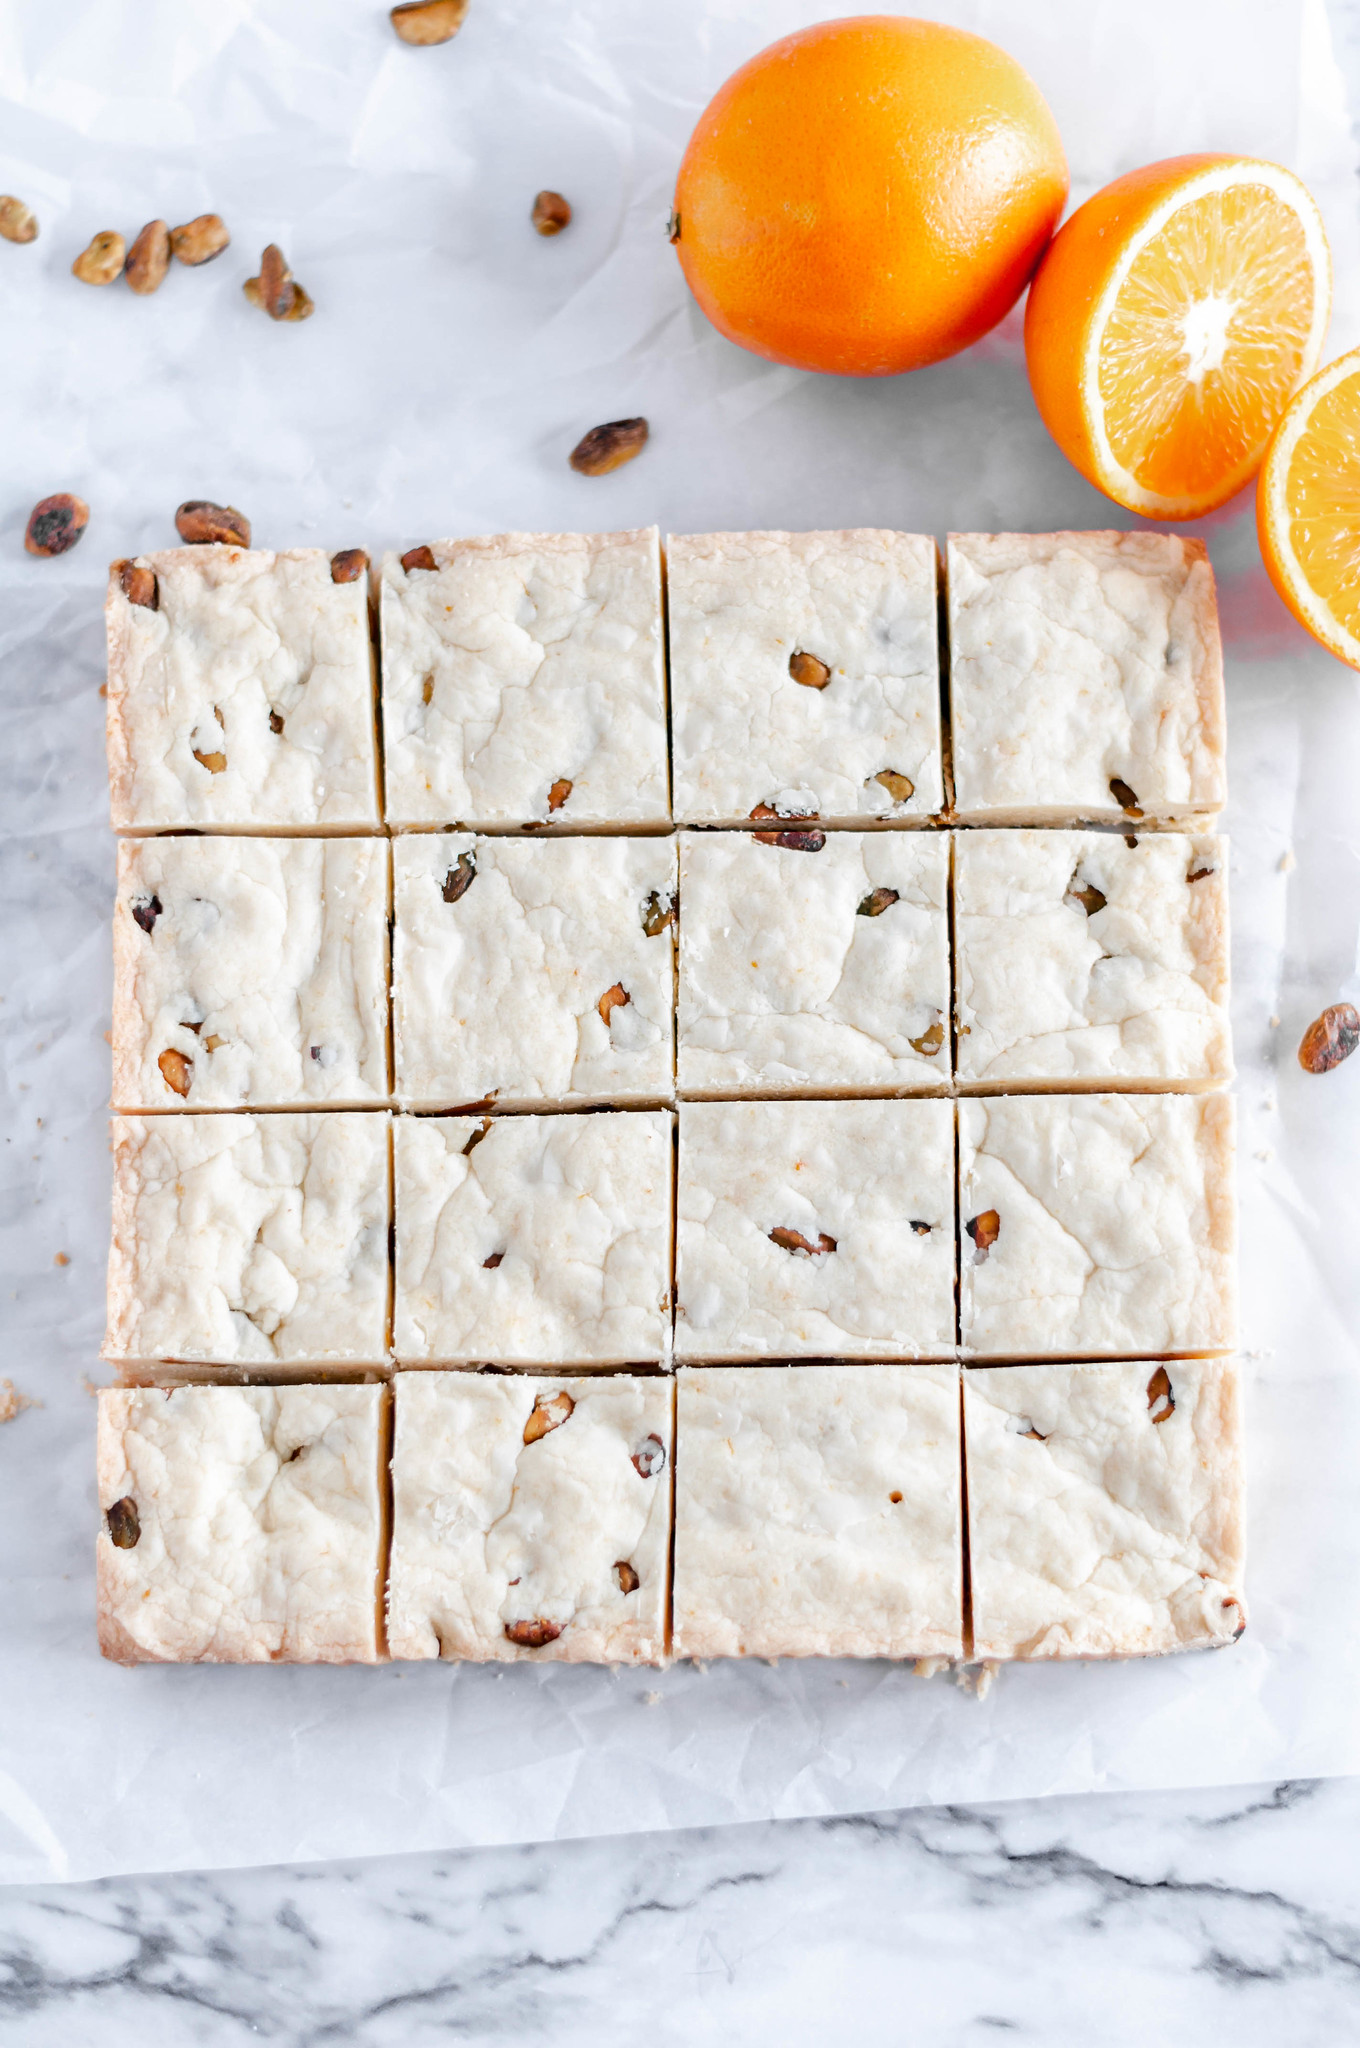 Orange Pistachio Shortbread Bars are a delicious, festive and simple cookie bar that you need to make this Christmas. Melt in your mouth delicious and oh so buttery.